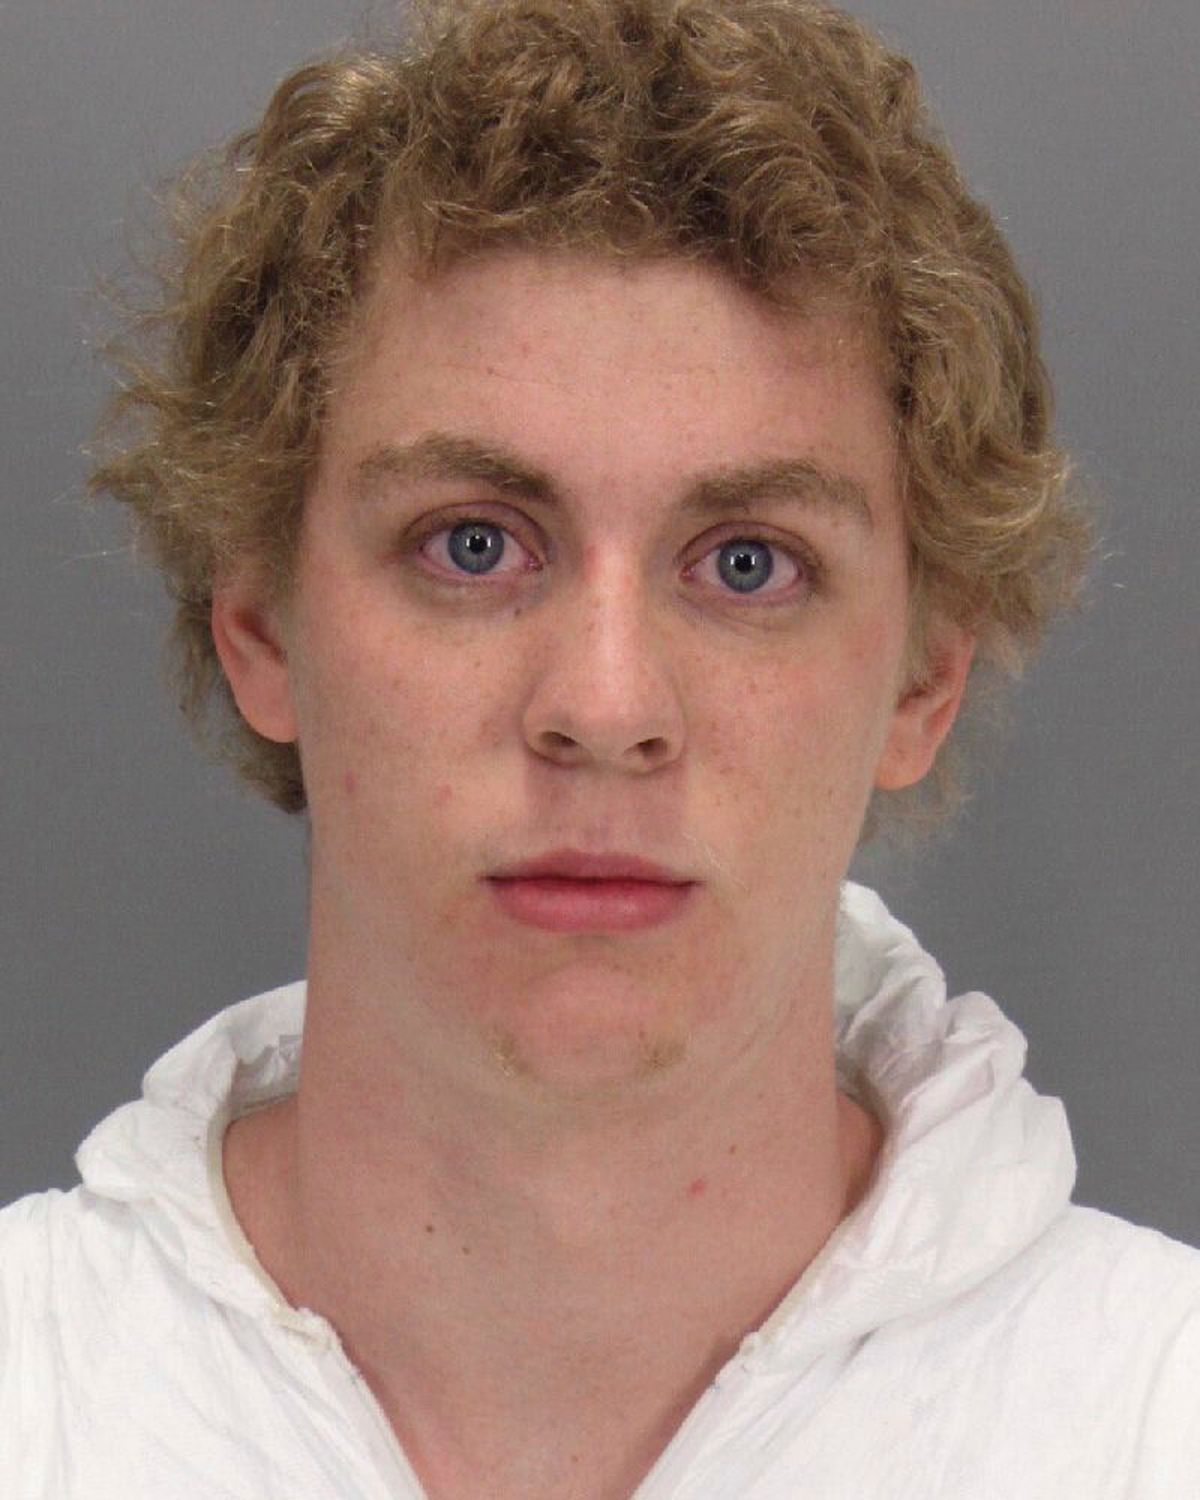 FILE - This January 2015 file booking photo released by the Santa Clara County Sheriff's Office shows Brock Turner. The former Stanford University swimmer convicted of sexually assaulting an unconscious woman is poised to leave jail Friday, Sept. 2, 2016, after serving half a six-month sentence that critics denounced as too lenient. (Santa Clara County Sheriff's Office via AP, File) (AP)